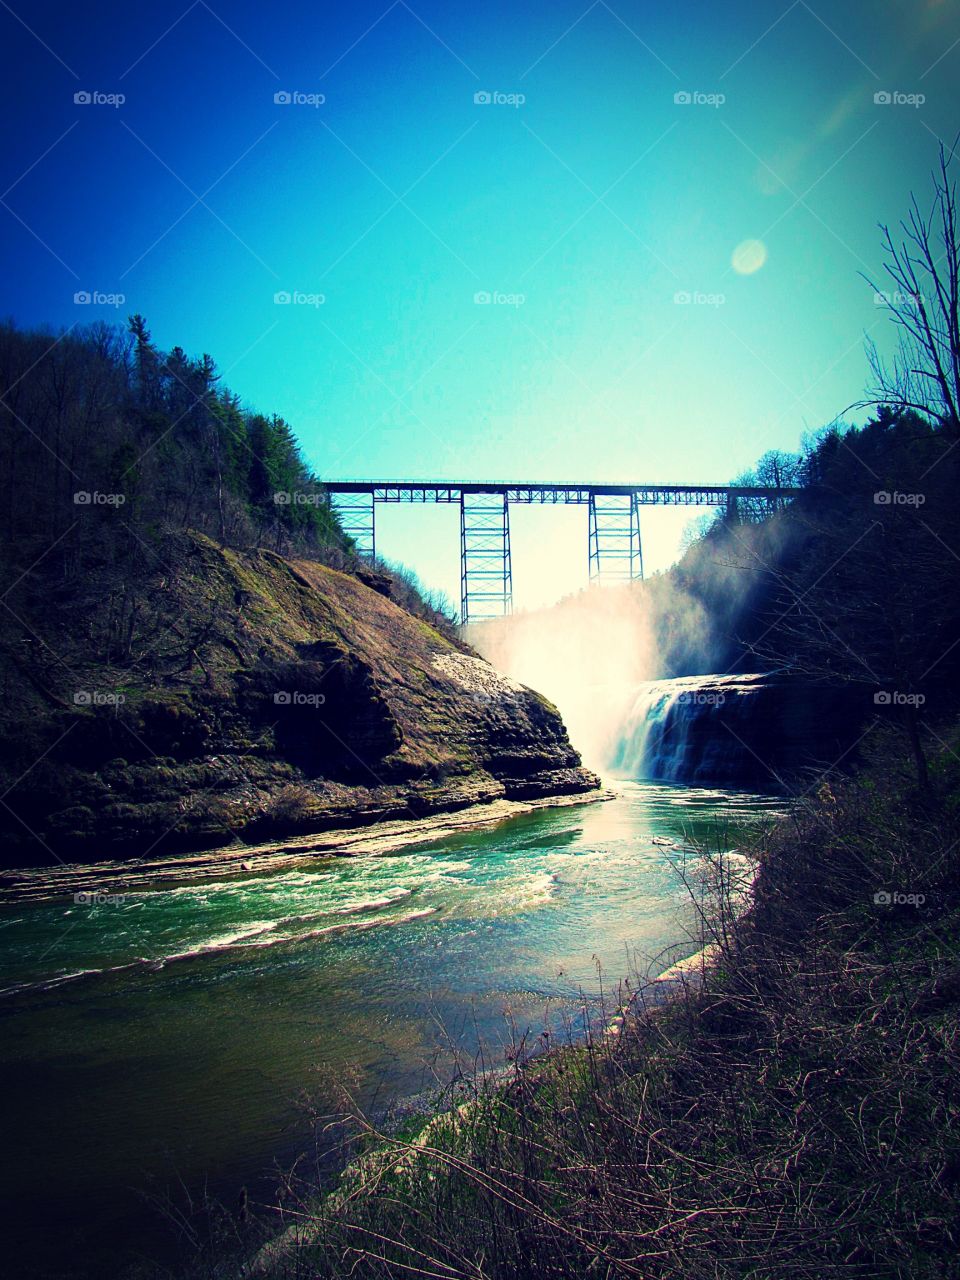 Photo of the day for Letchworth State Park